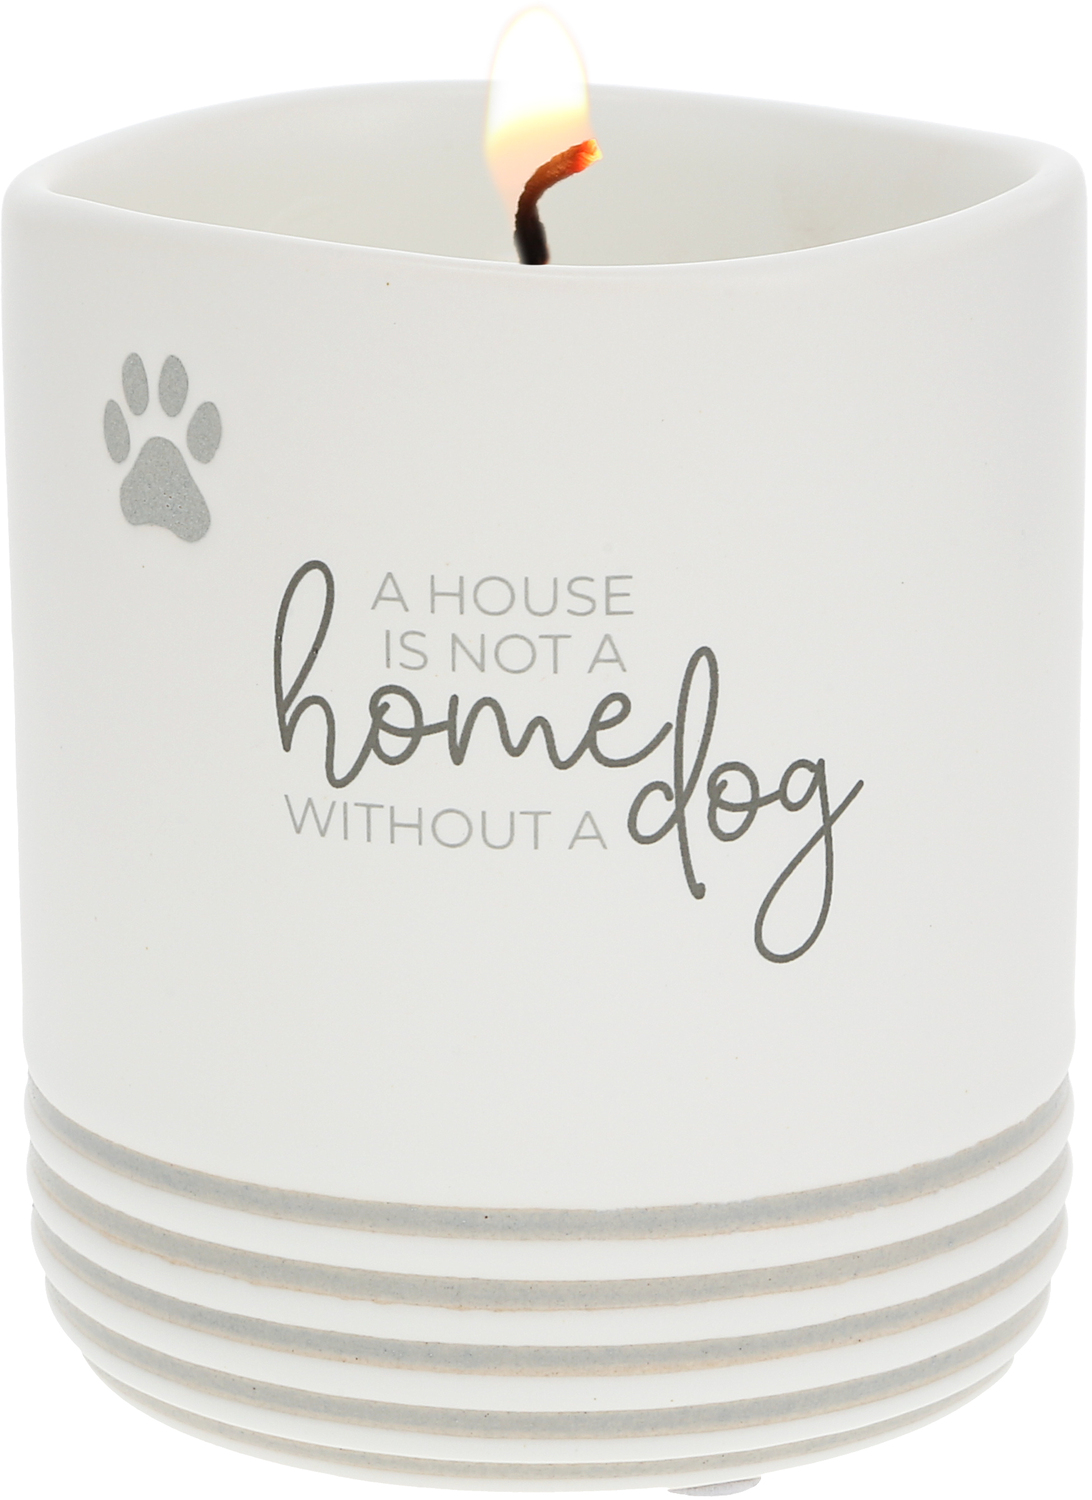 Home - Dog by Furever Pawsome - Home - Dog - 10 oz - 100% Soy Wax Reveal Candle
Scent: Tranquility